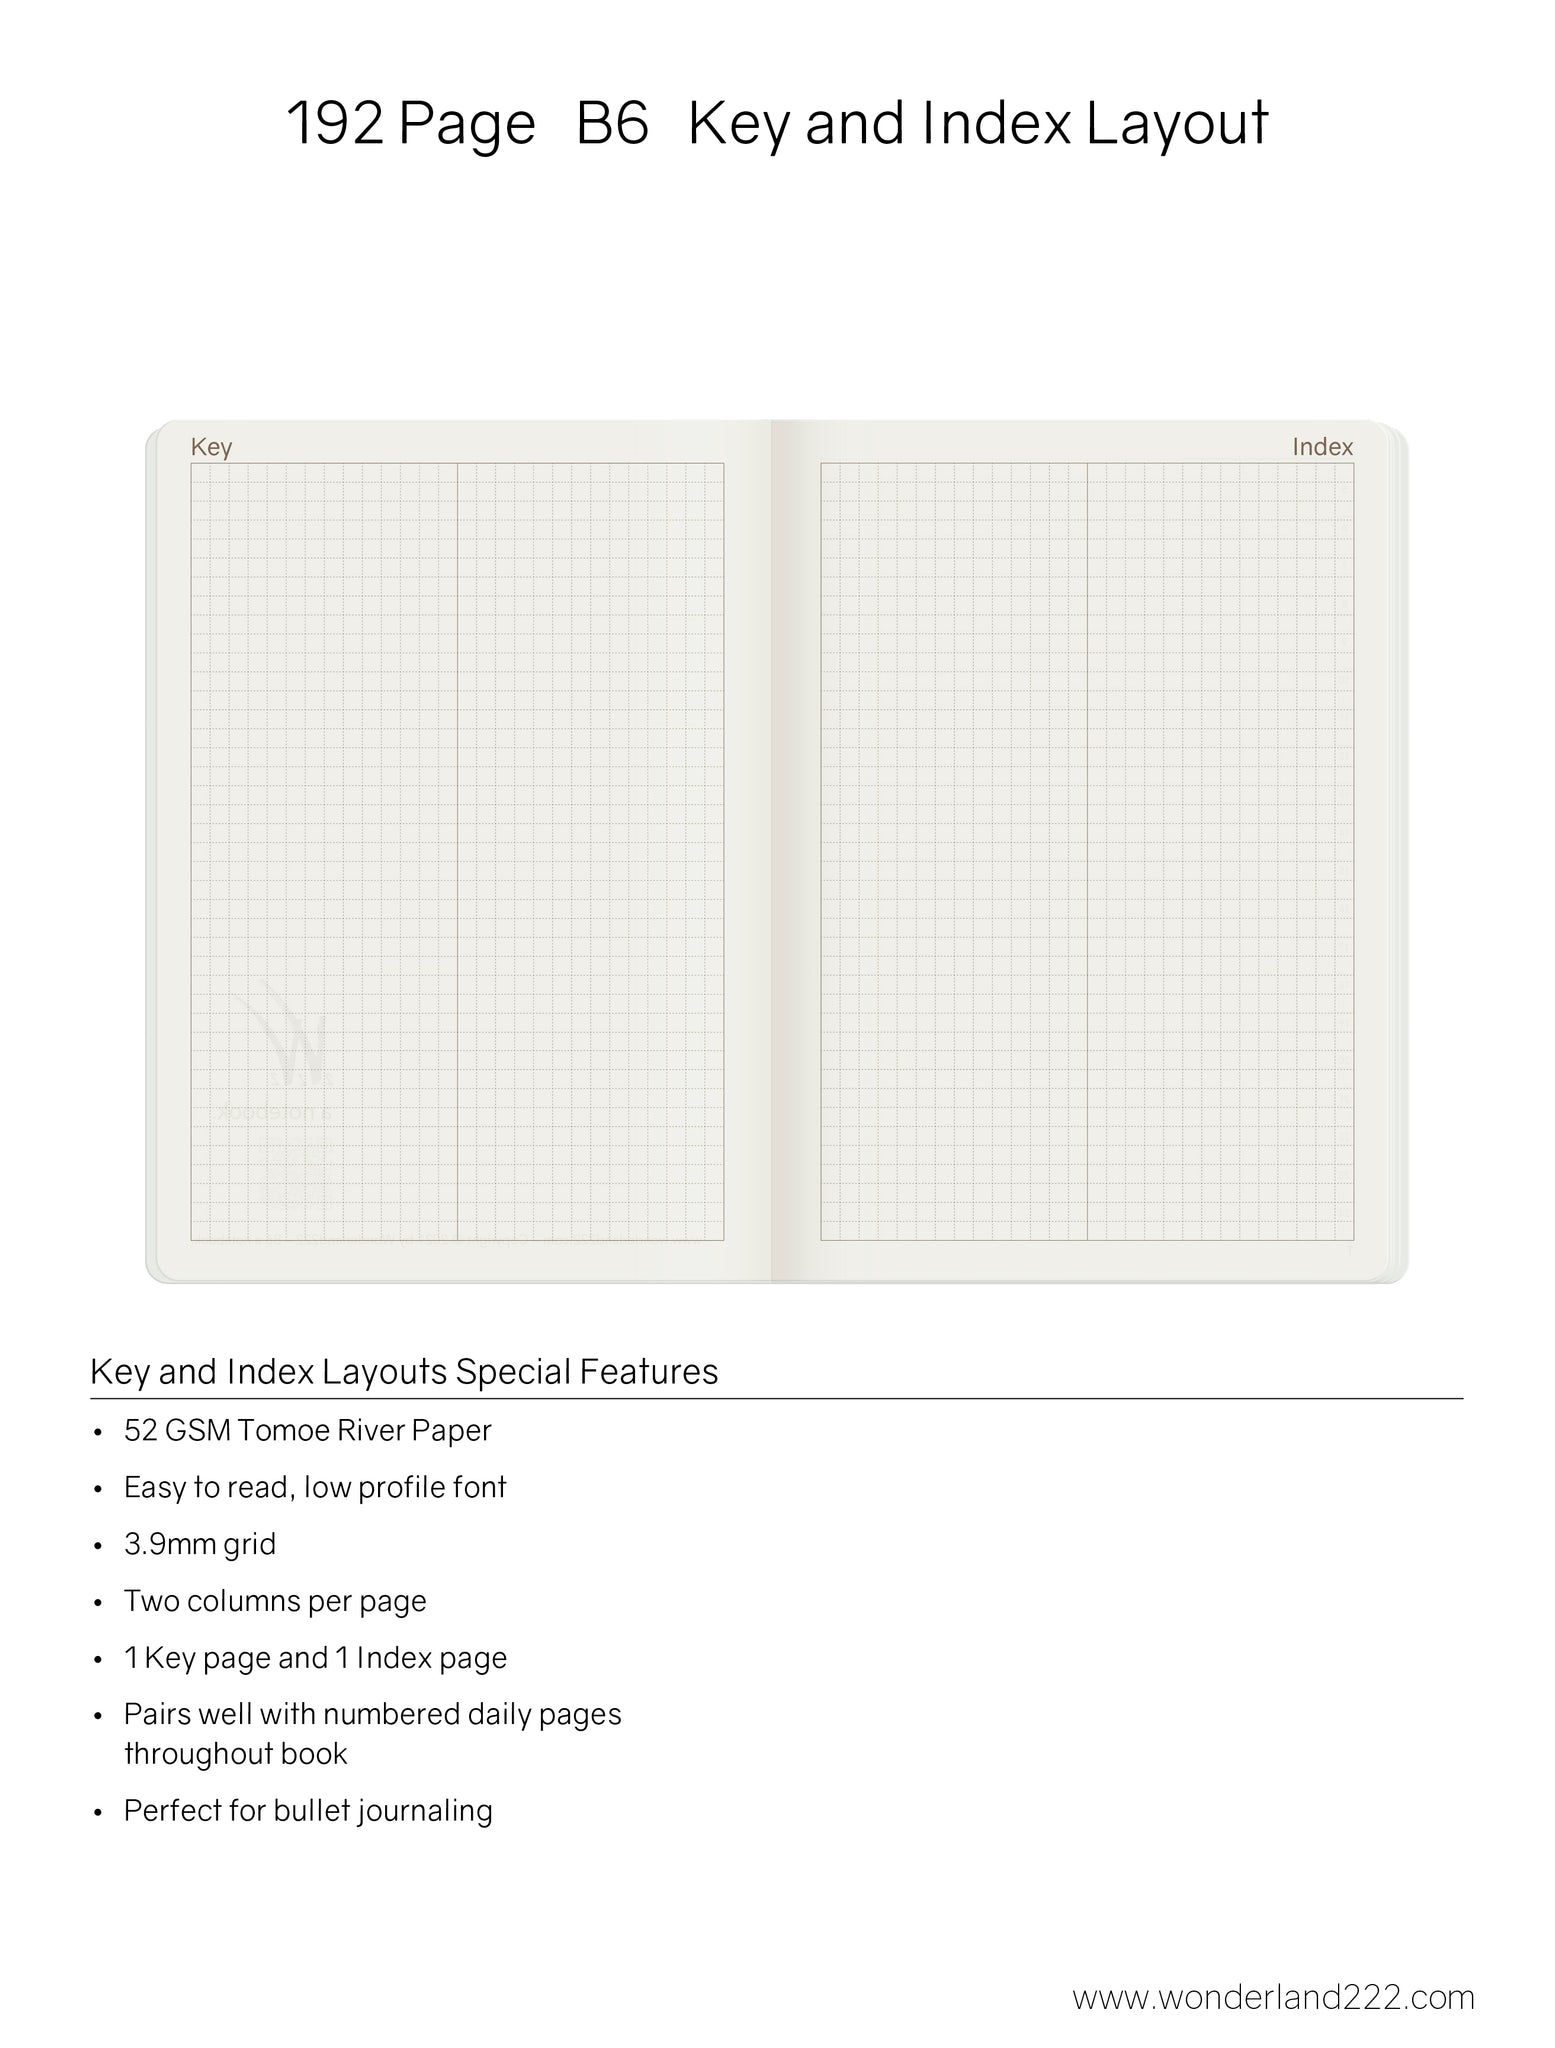 B6 Notebook (192 pages) - 52gsm Tomoe River Paper